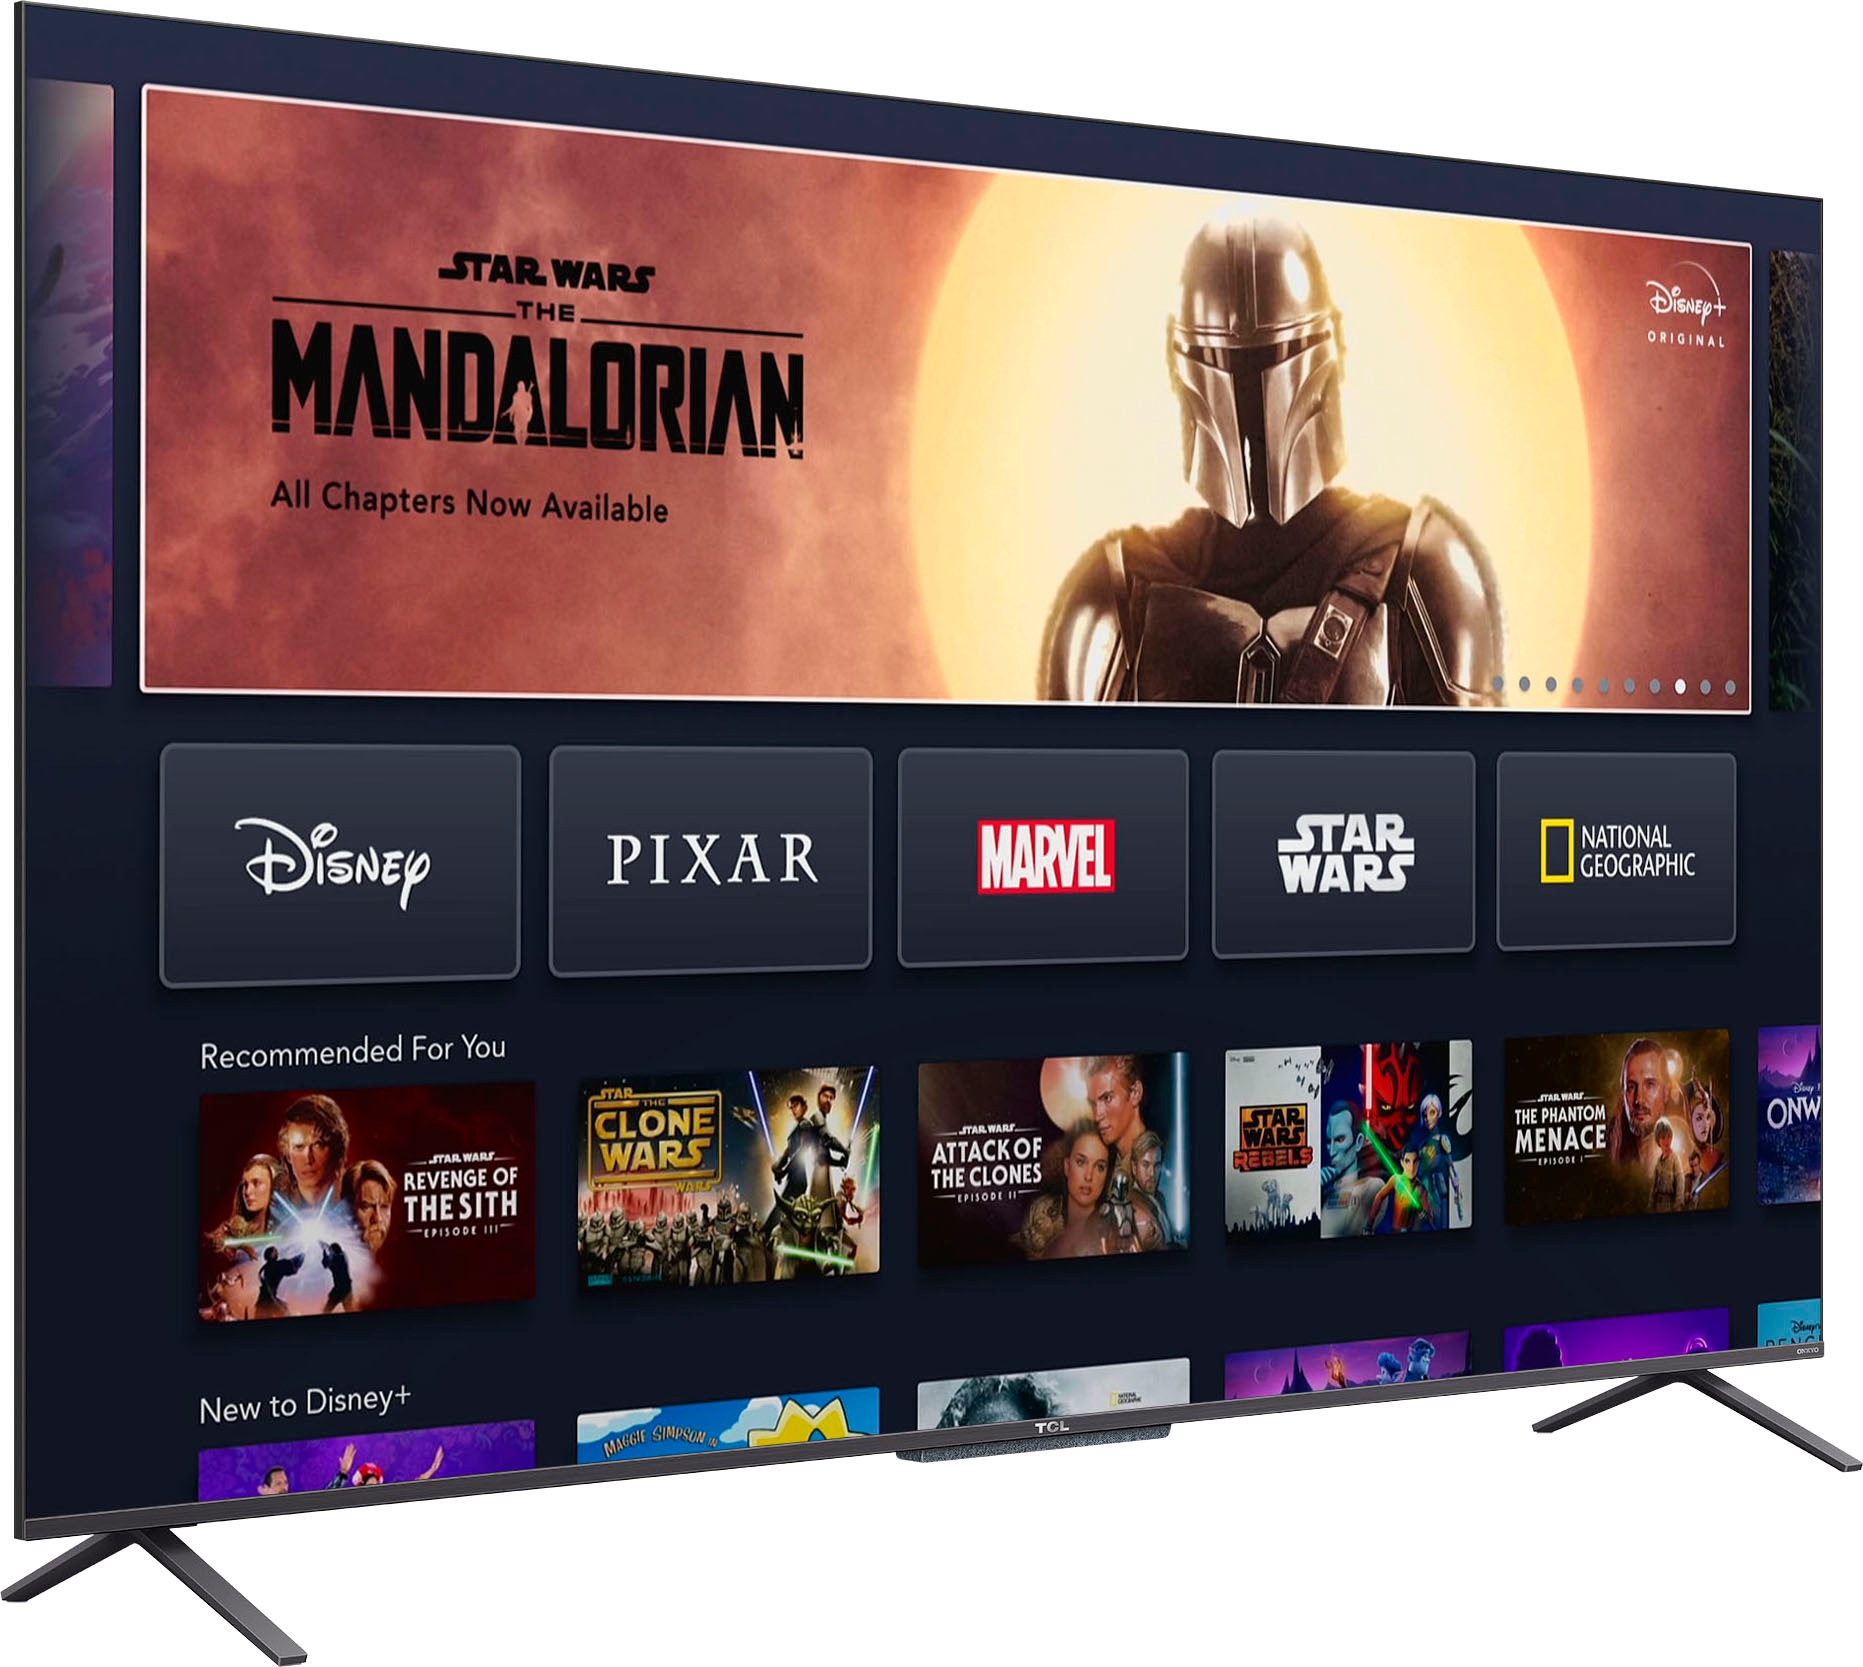 TCL QLED-Fernseher, 126 cm/50 Zoll, 4K Ultra HD, Smart-TV-Android TV, Android 11, Onkyo-Soundsystem